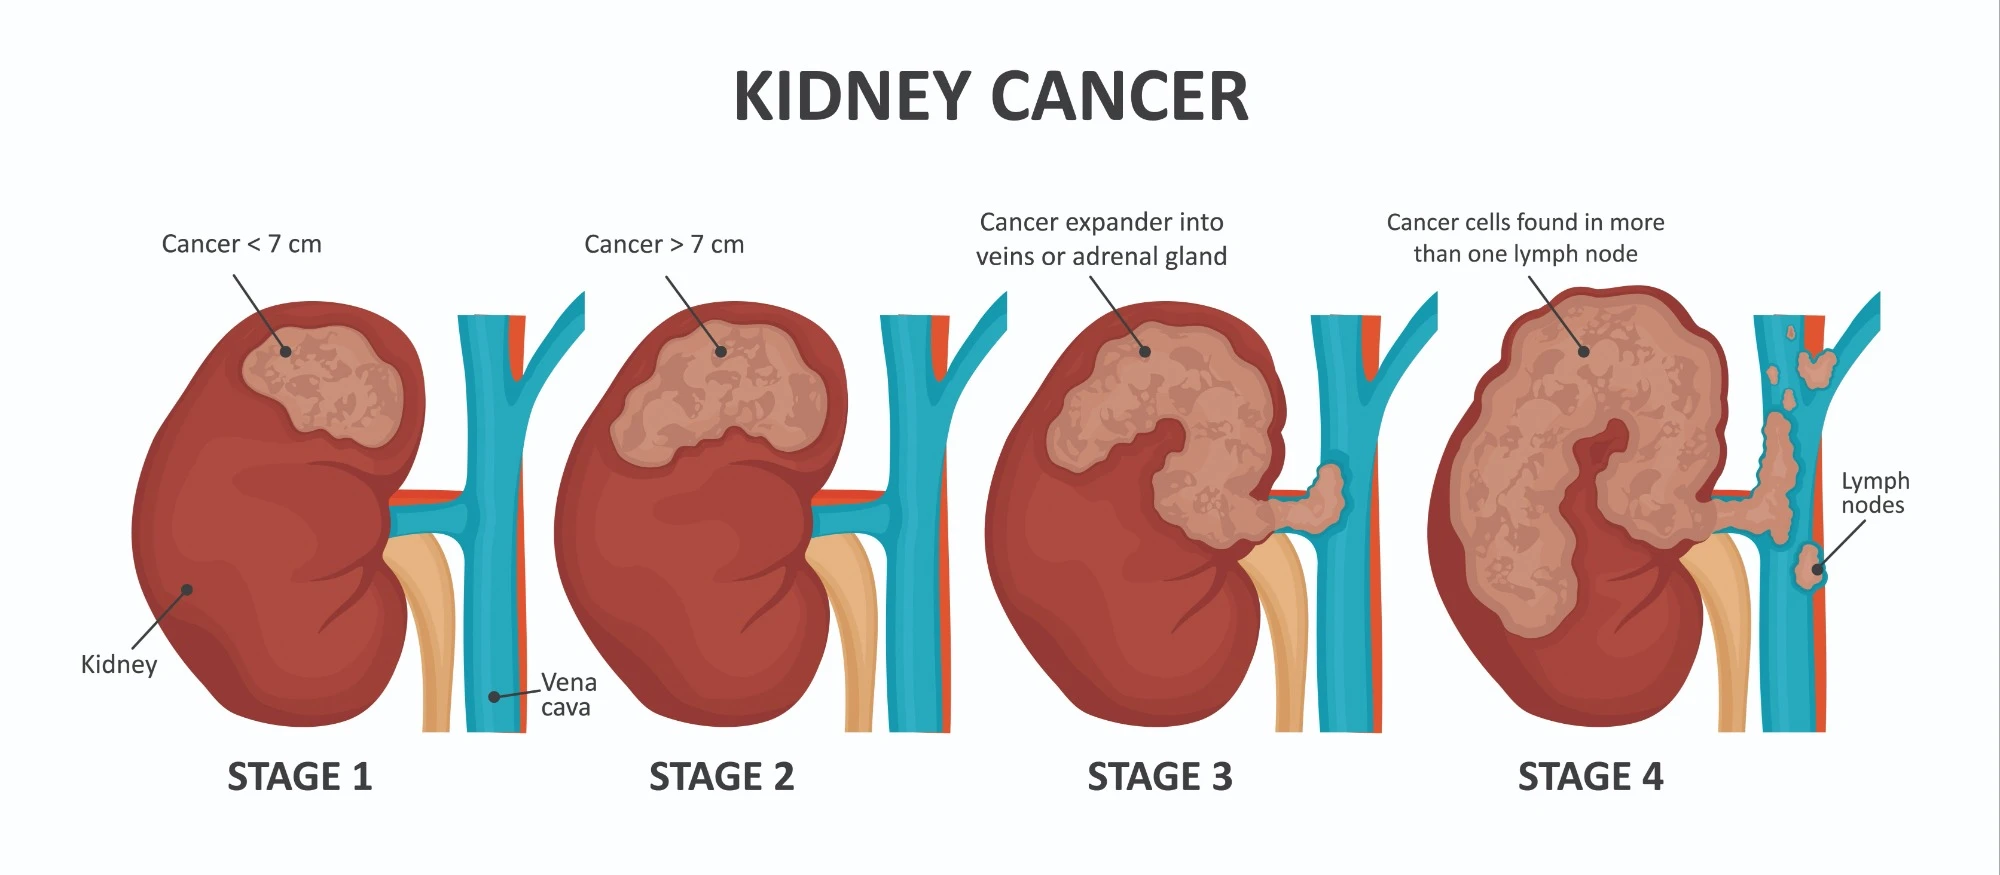 diagram showing development of kidney cancer in 4 stages